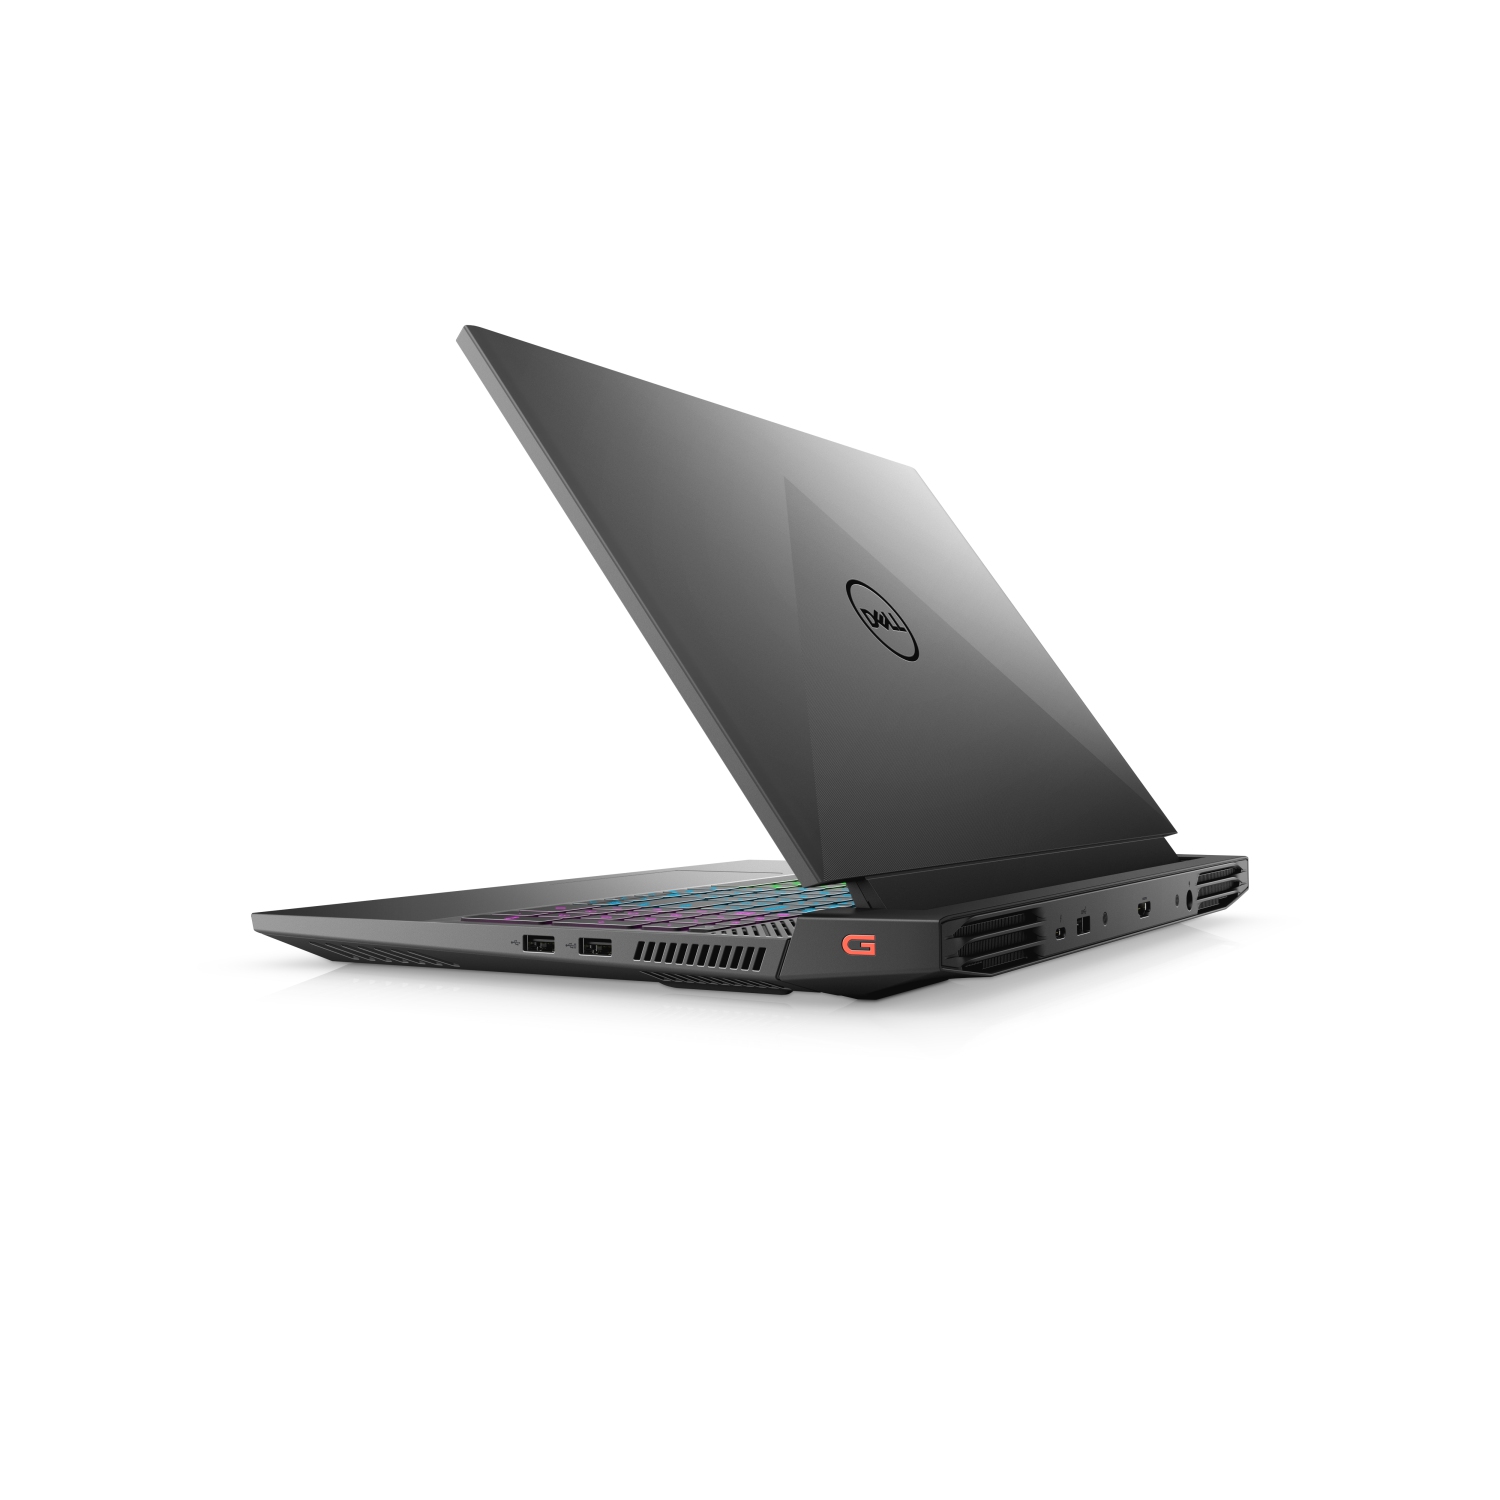 Refurbished (Excellent) - Dell G15 5511 Gaming Laptop (2021), 15.6" FHD, Core i7 - 1TB SSD - 32GB RAM - RTX 3060, 8 Cores @ 4.6 GHz - 11th Gen CPU Certified Refurbished